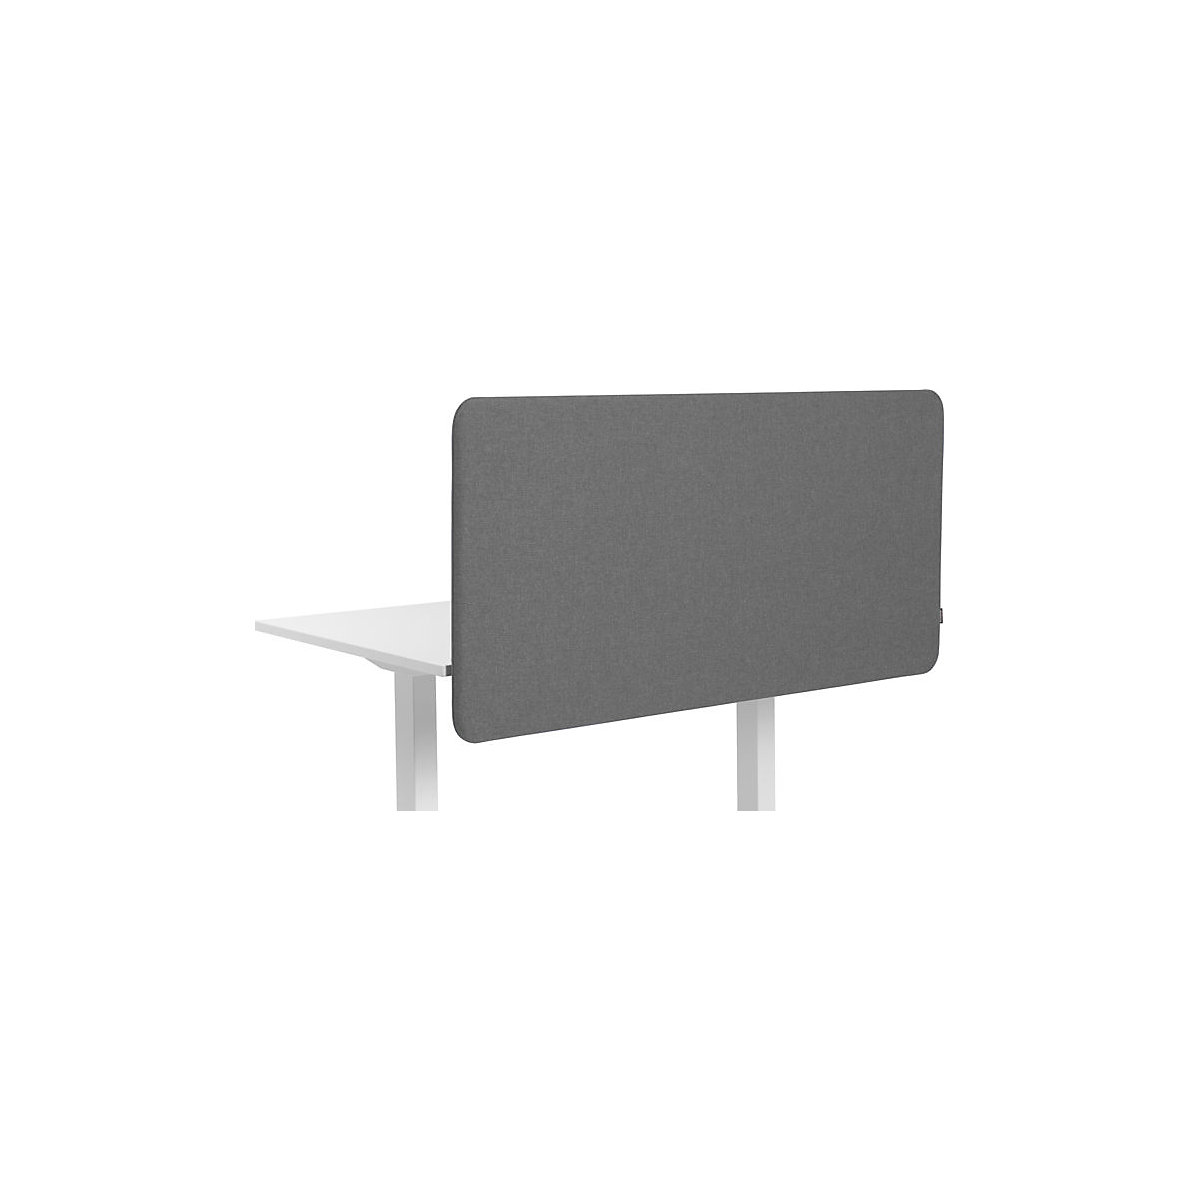 Softline Salsa acoustic desk partition, suspended downwards, HxW 650 x 600 mm, fabric, grey-2